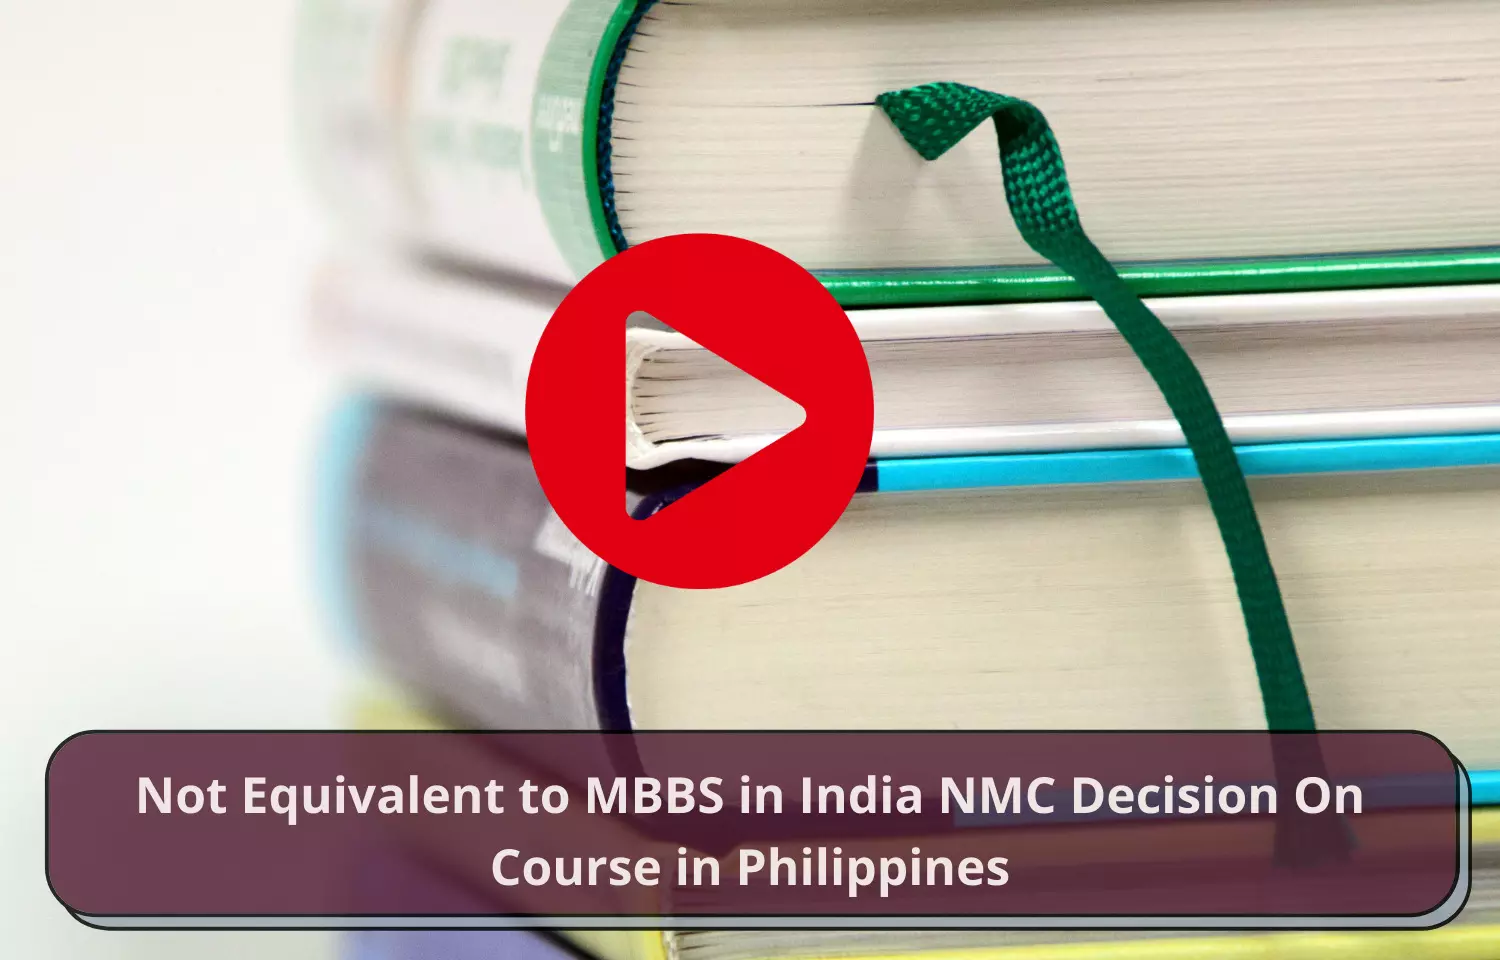 Not equivalent to MBBS in India: NMC decision on course in Philippines